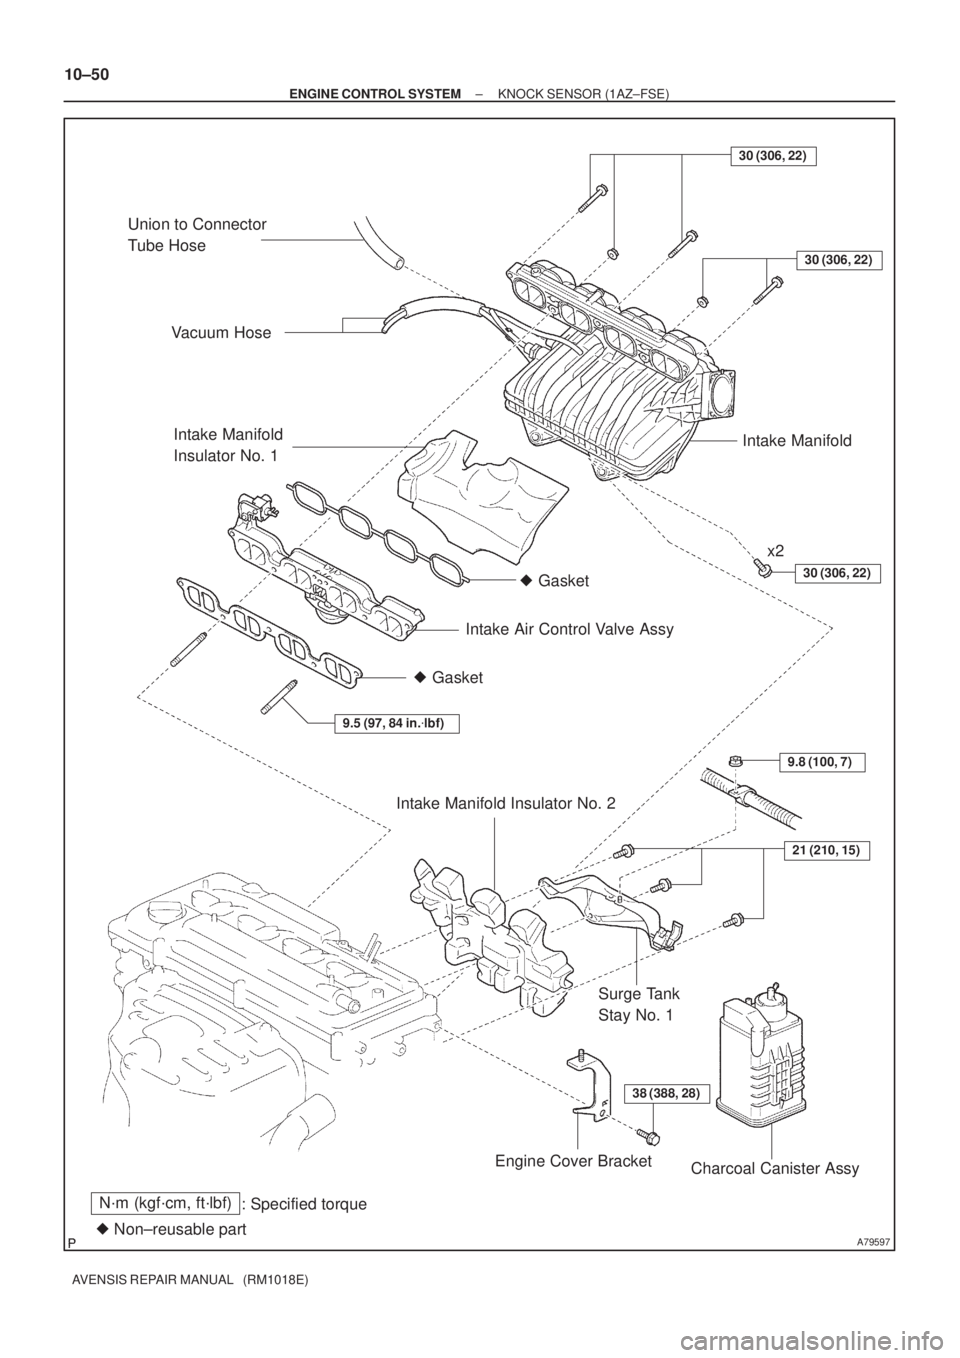 TOYOTA AVENSIS 2005  Service Repair Manual A79597
N´m (kgf´cm, ft´lbf)
: Specified torque
 Non±reusable part Gasket Gasket
38 (388, 28)
21 (210, 15)
9.5 (97, 84 in.lbf)
30 (306, 22)
9.8 (100, 7)
30 (306, 22)
30 (306, 22)
Union to Conne